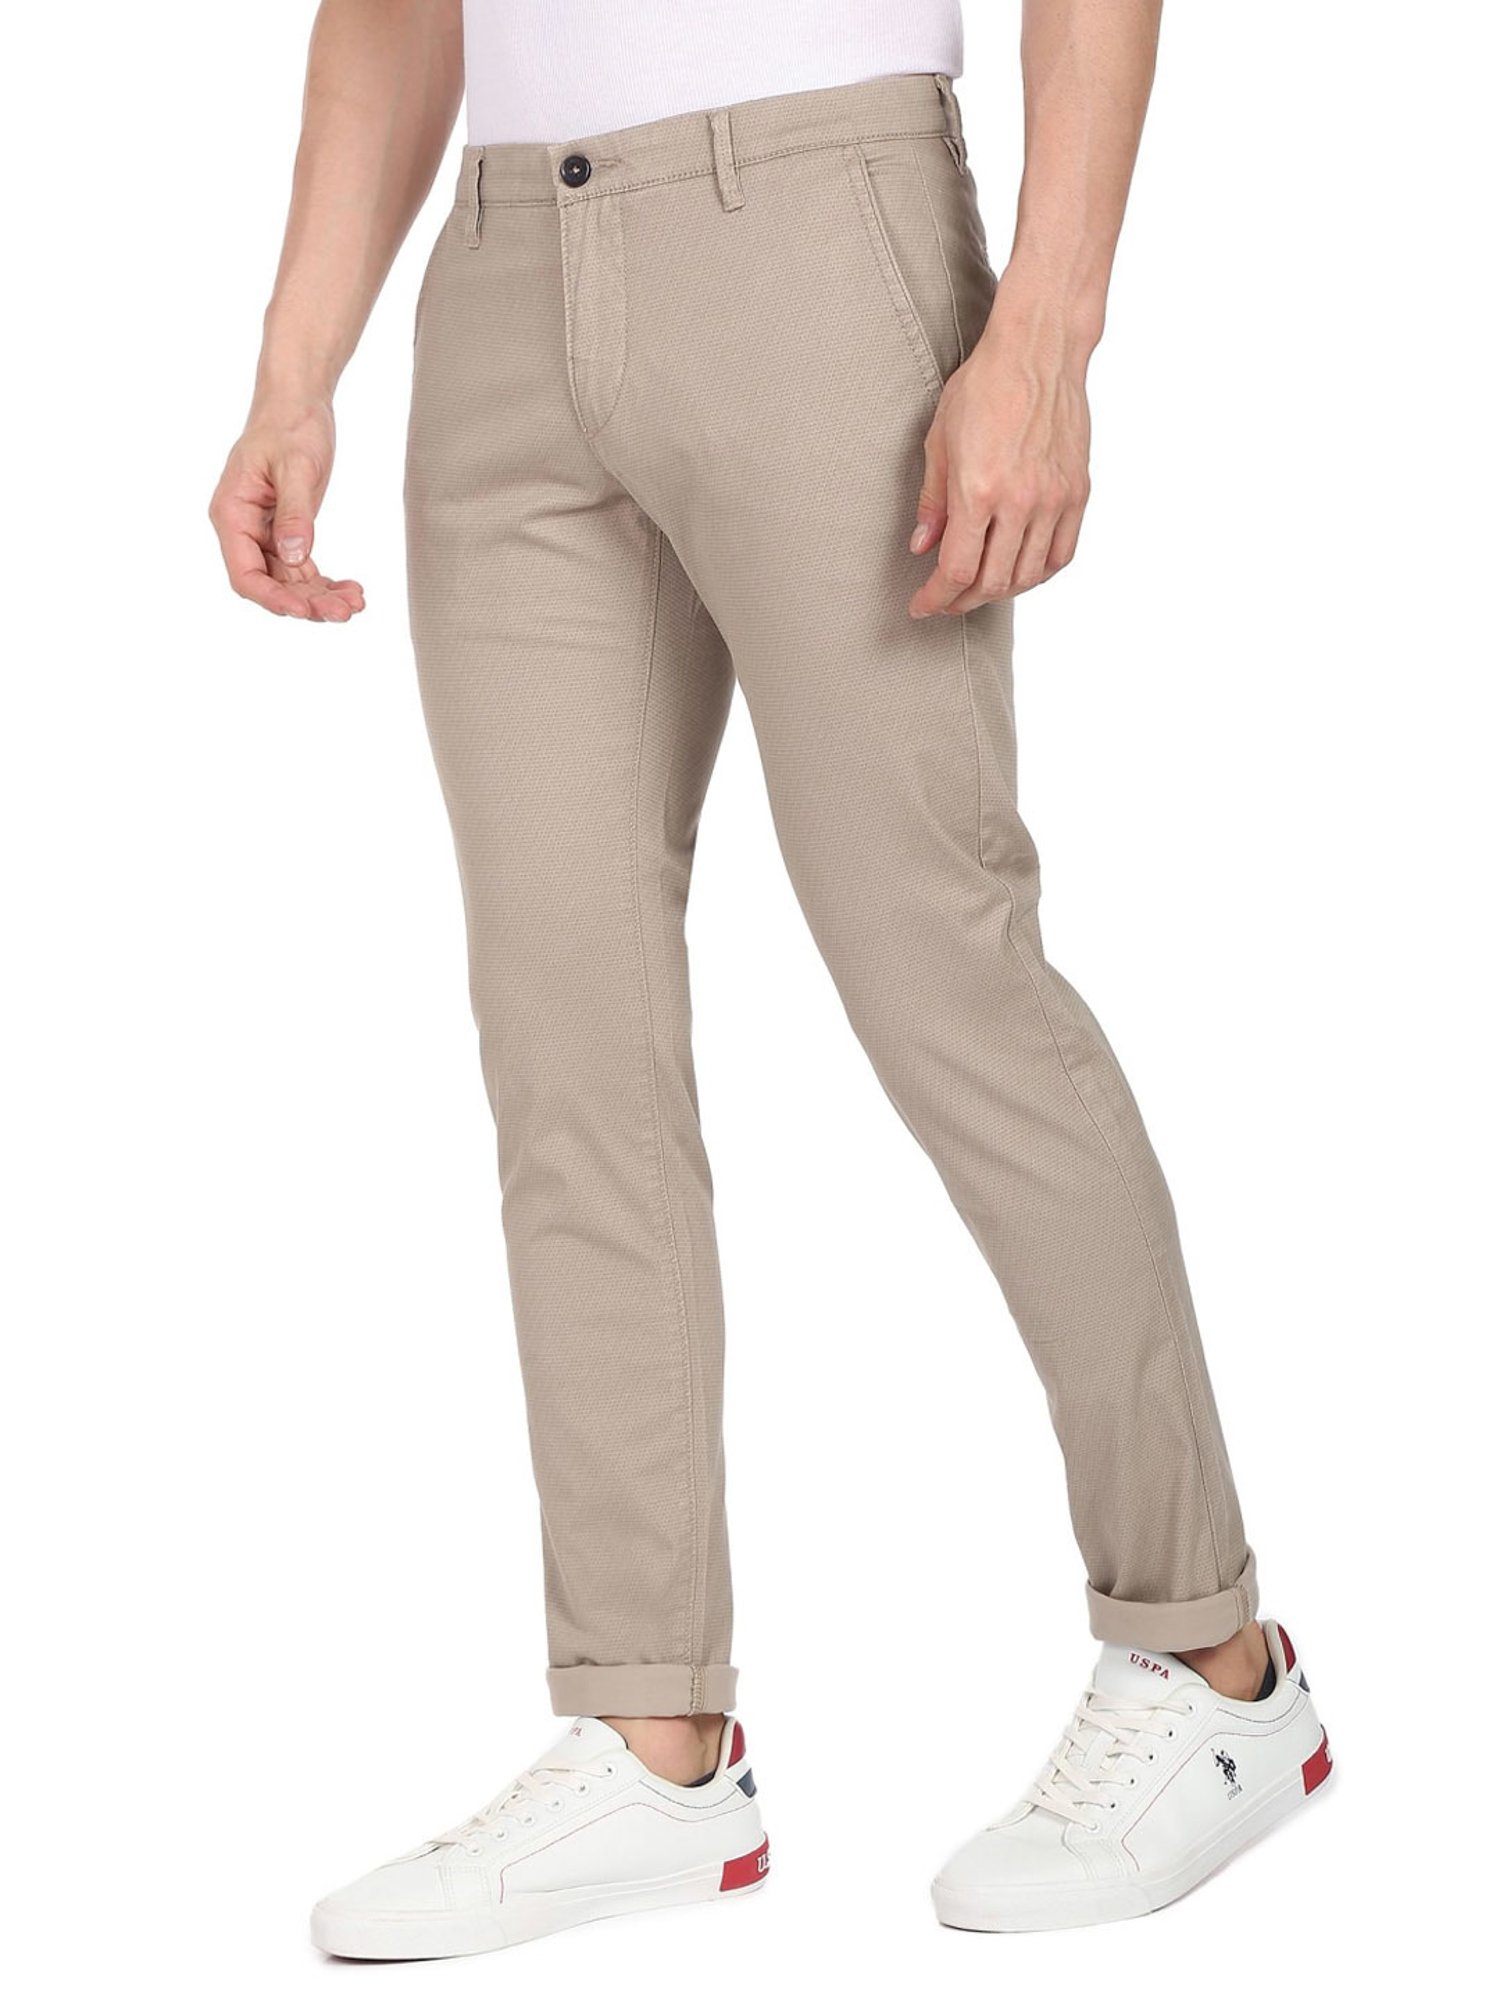 Polo Ralph Lauren Stretch Slim Fit Chino Pants | 6pm